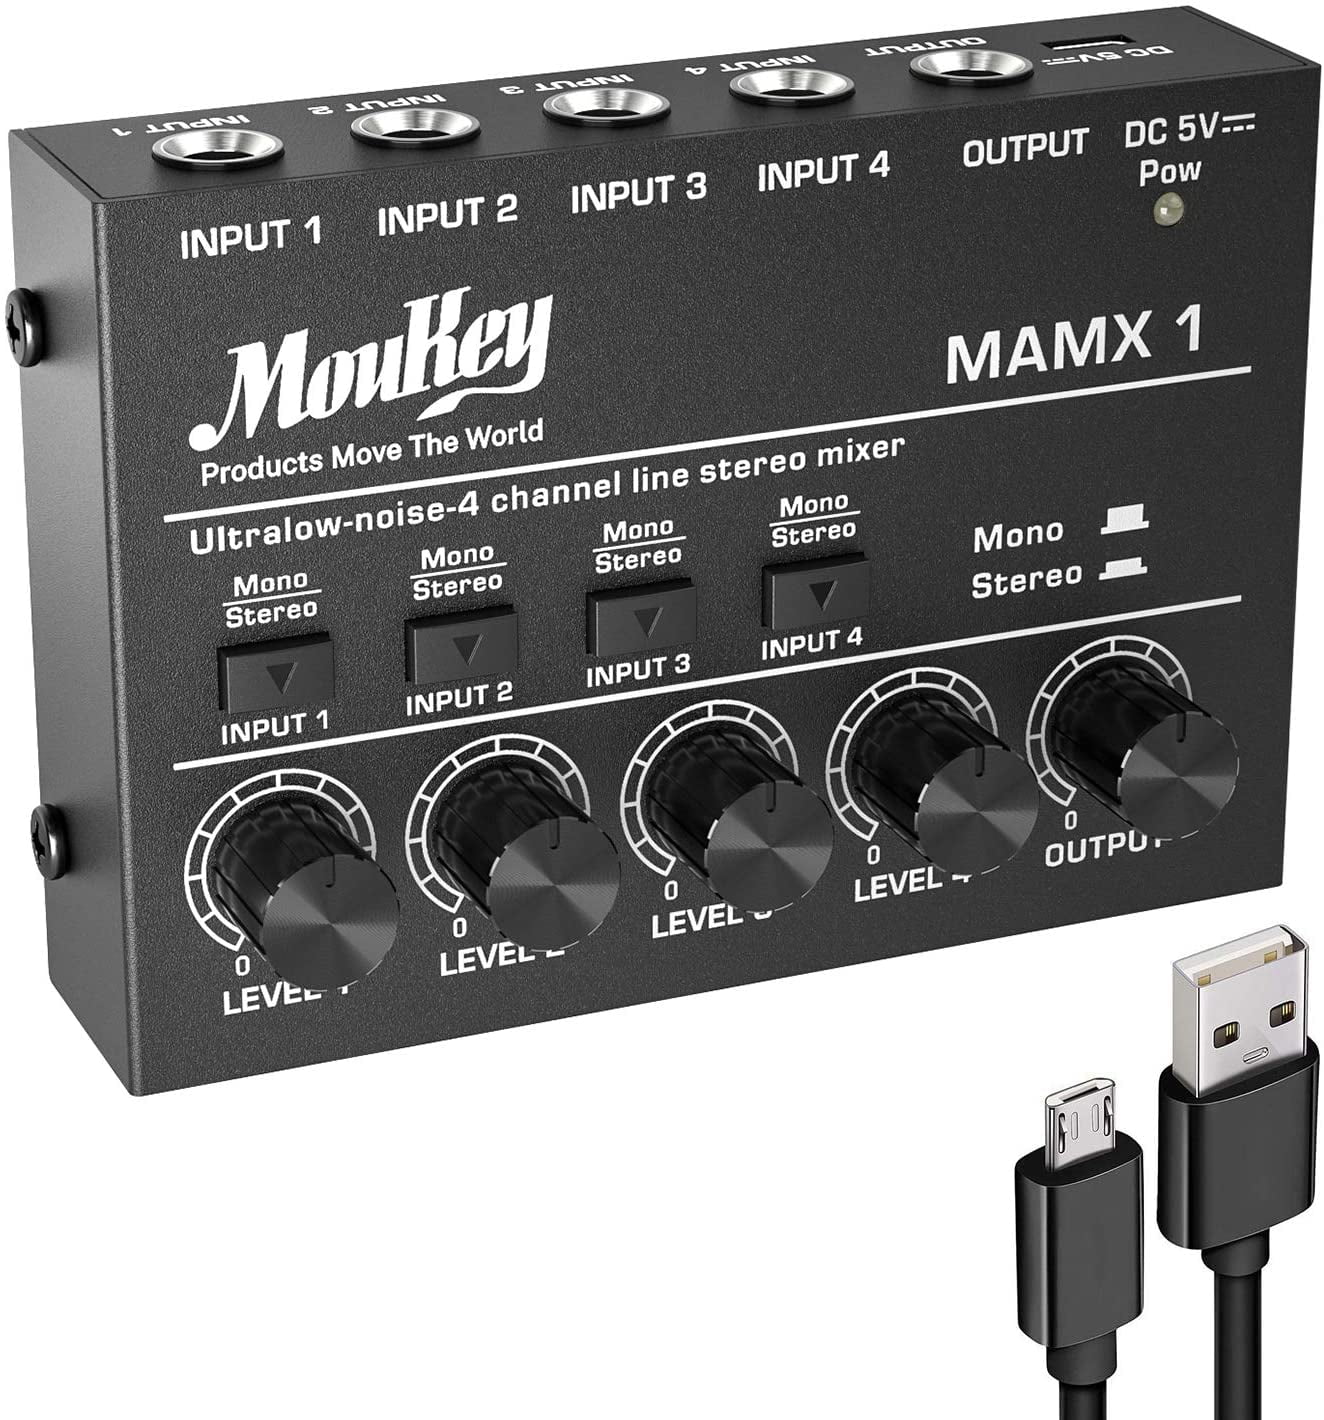 Moukey 4-Stereo Mini Mixer, Ultra Low-Noise 4-Channel Line Mixer for Sub-Mixing, DC 5V Audio Mixer with USB Cable, As Microphones, Guitars, Bass, Keyboards or Stage Mixer-MAMX1 -